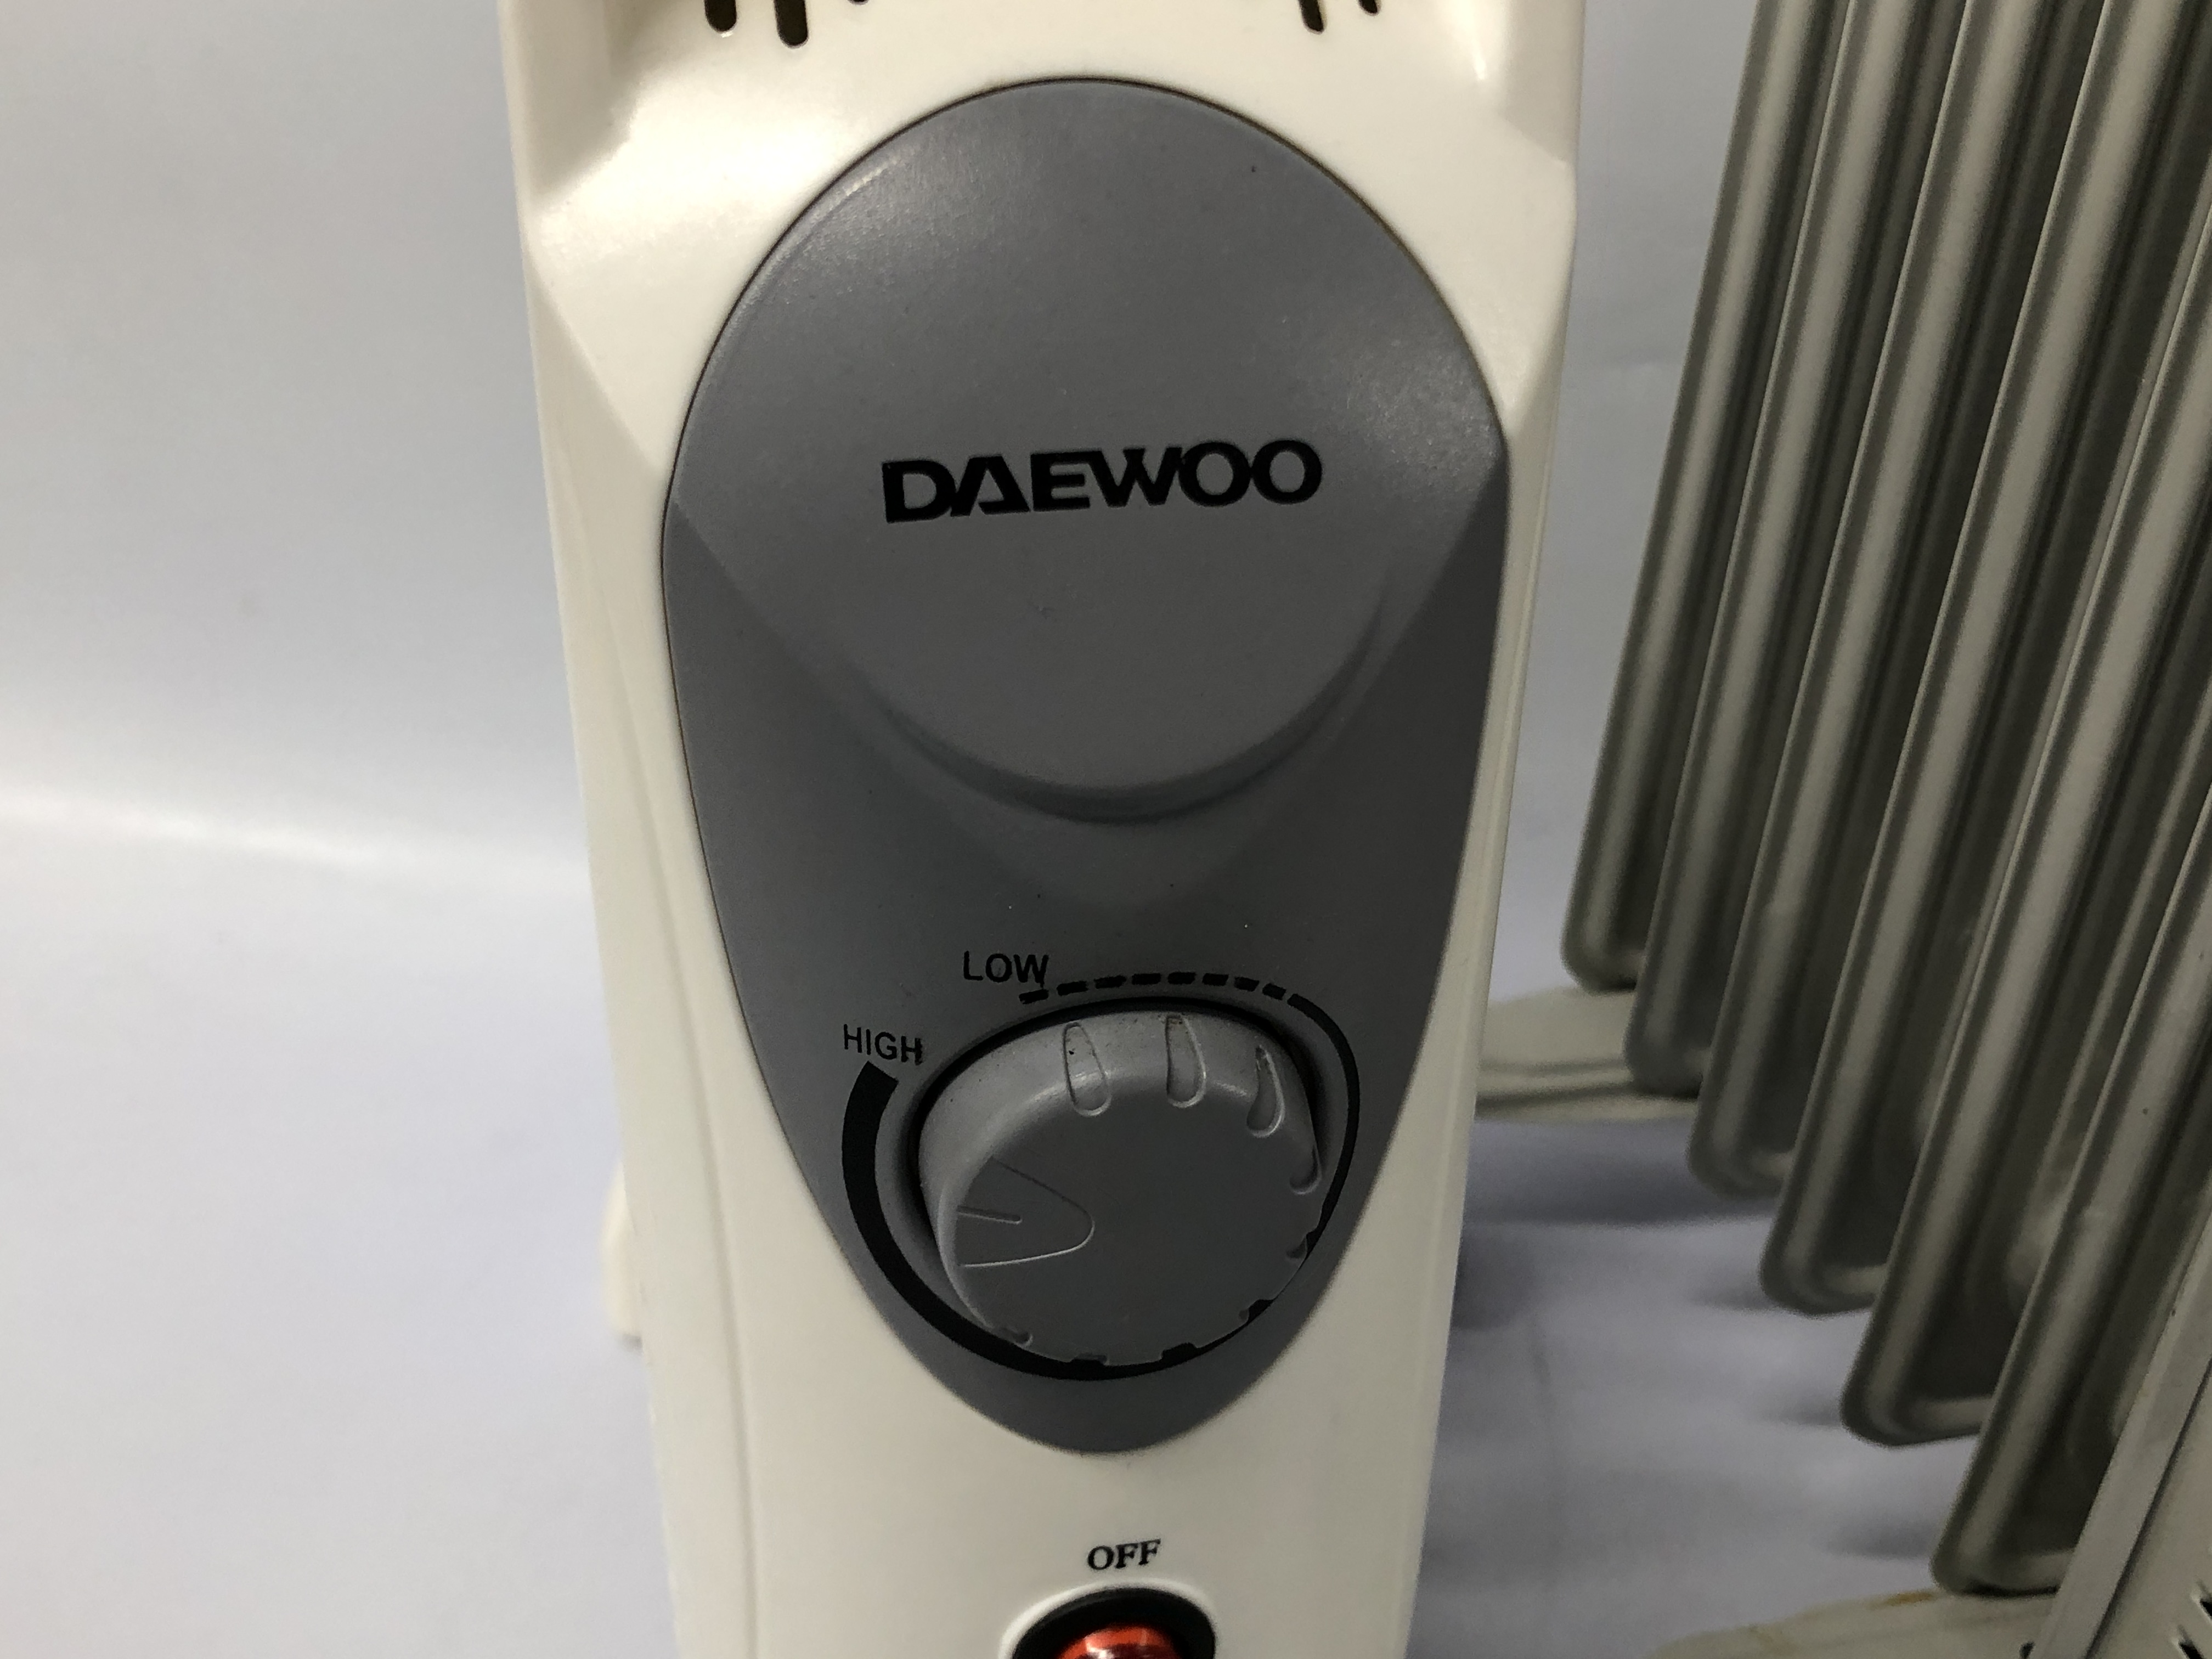 2 DAEWOO OIL FITTED ELECTRIC HEATERS, WHEELED HEATER H 54CM, W 32CM, SMALLER HEATER H 35CM, - Image 2 of 9